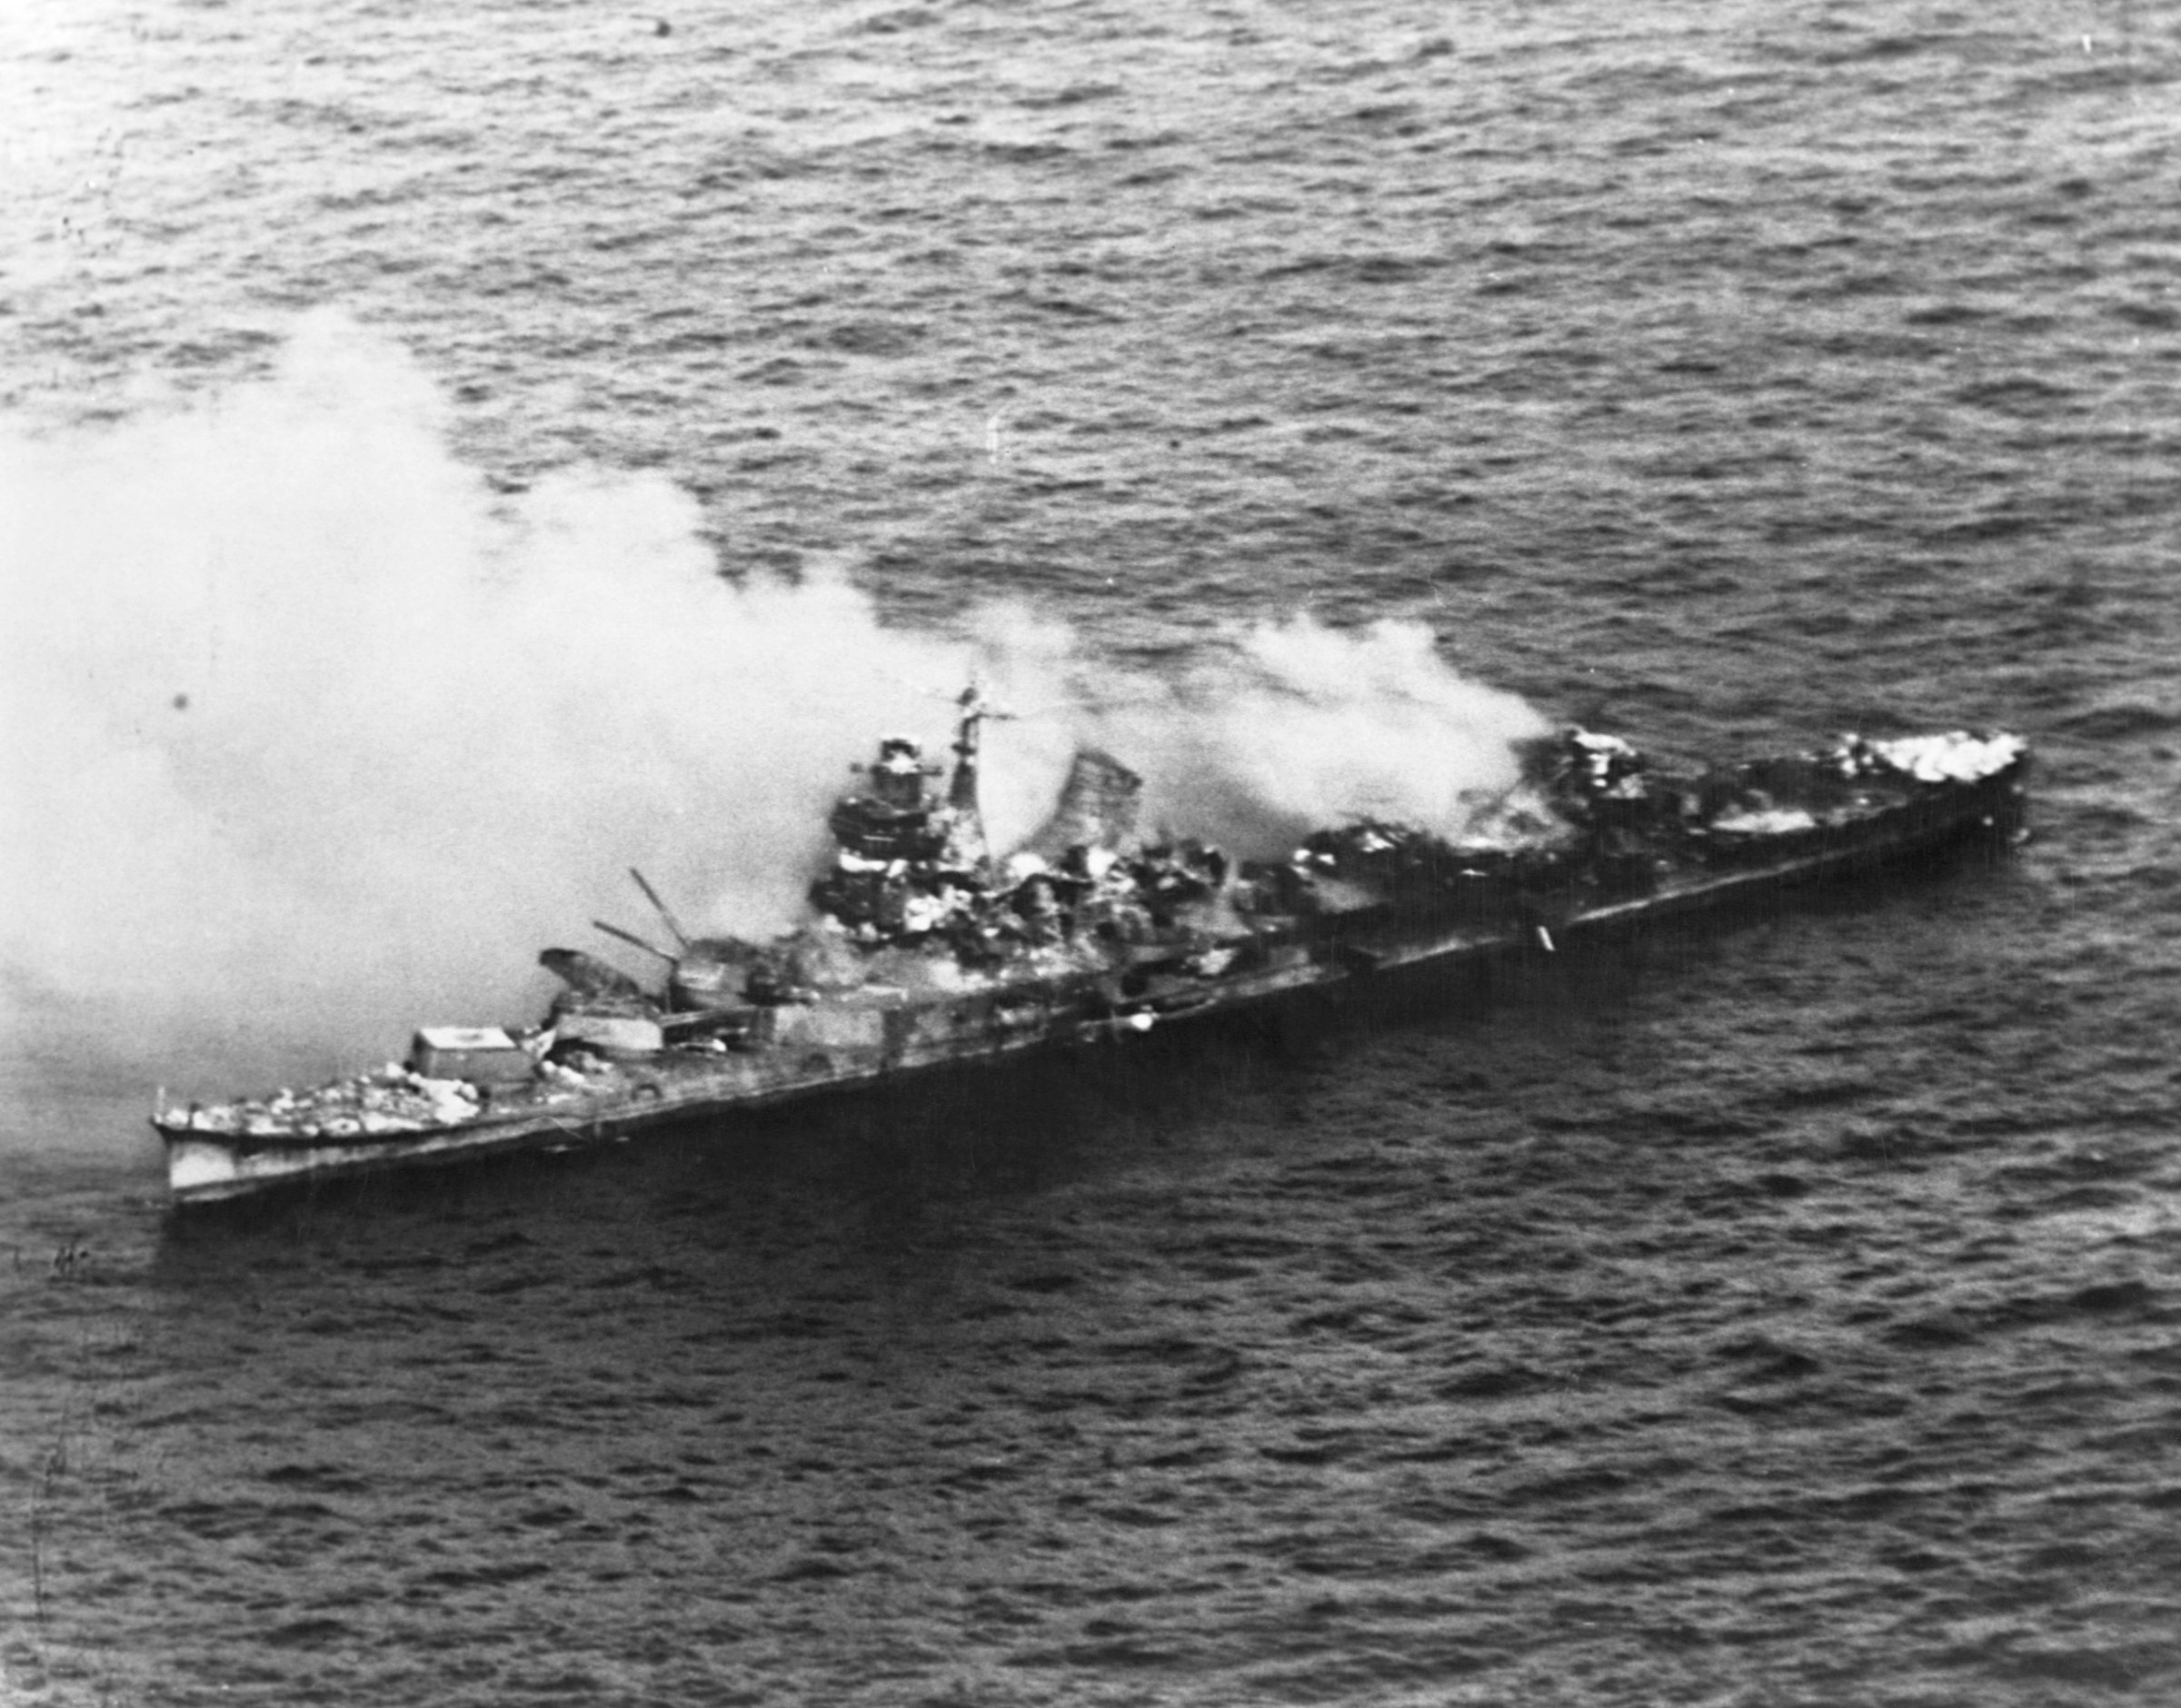 A Japanese Mogani class cruiser burns after being bombed in the Battle of Midway in June 1942.